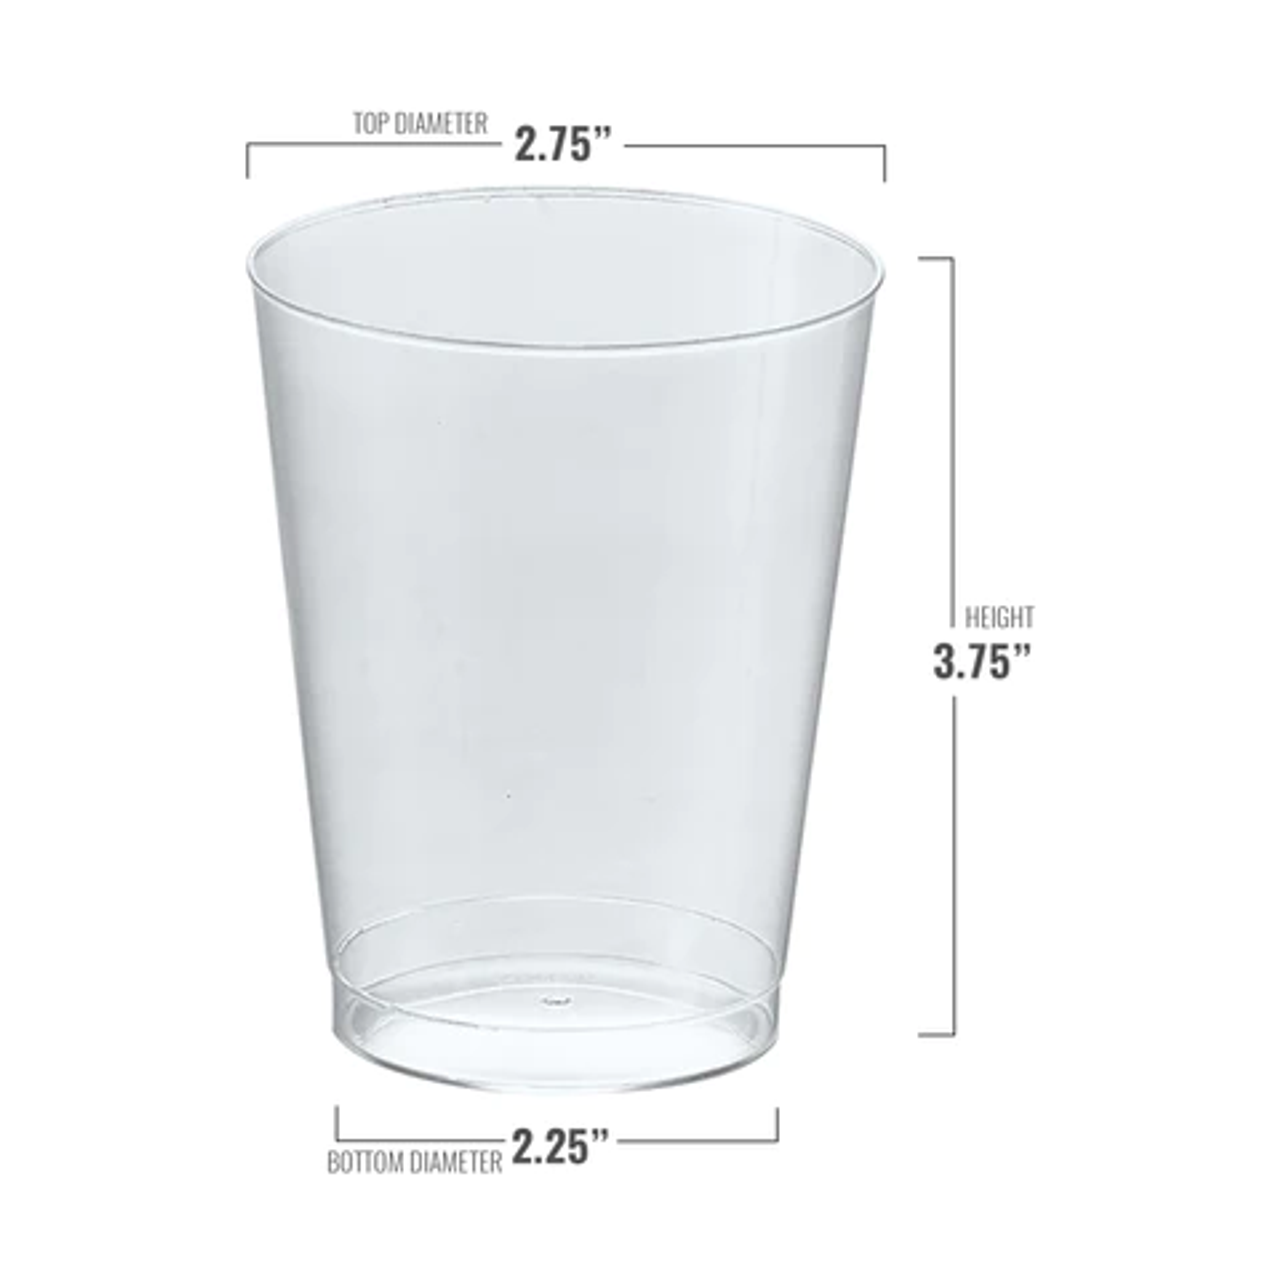 10 oz. Clear Round Plastic Cups (20 count)